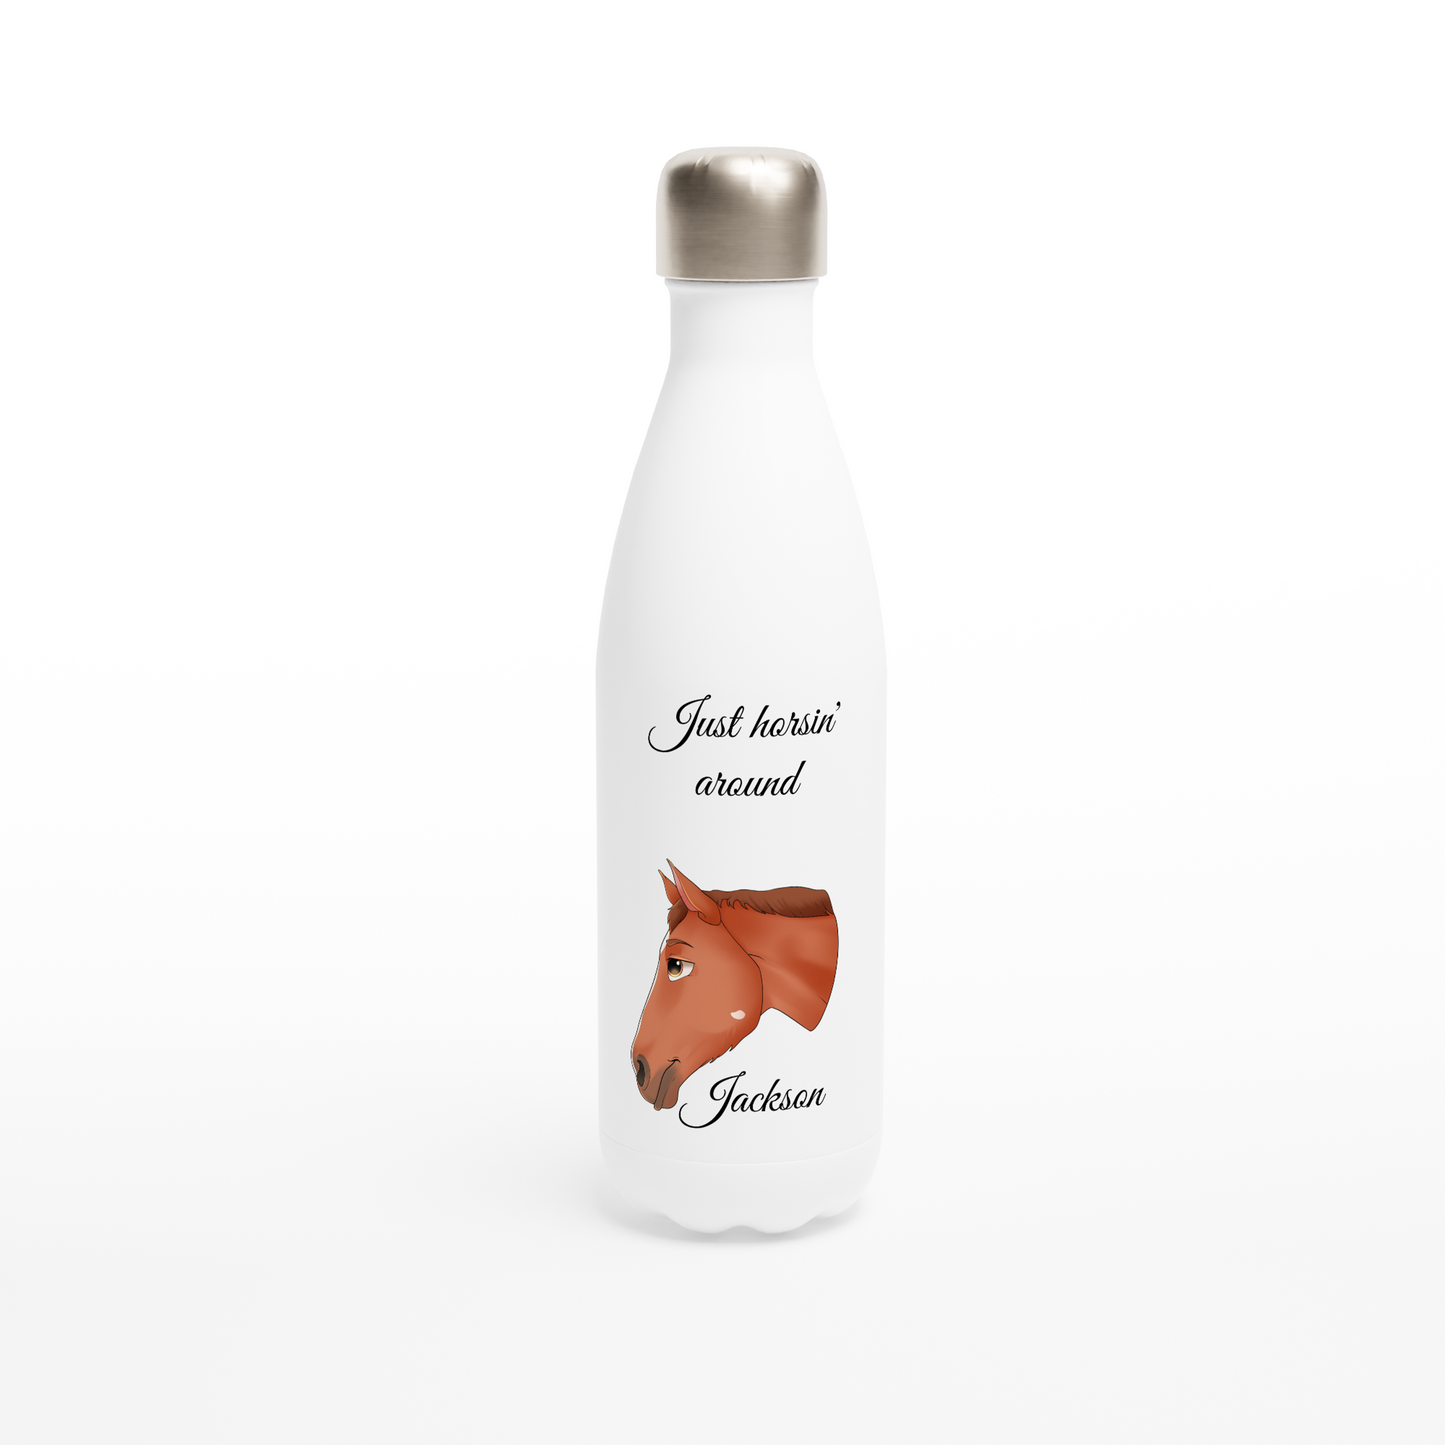 Hand Drawn Horse || 17oz Stainless Steel Water Bottle - Fairytale Cartoon - Personalized; Hand drawn & personalized with your horse